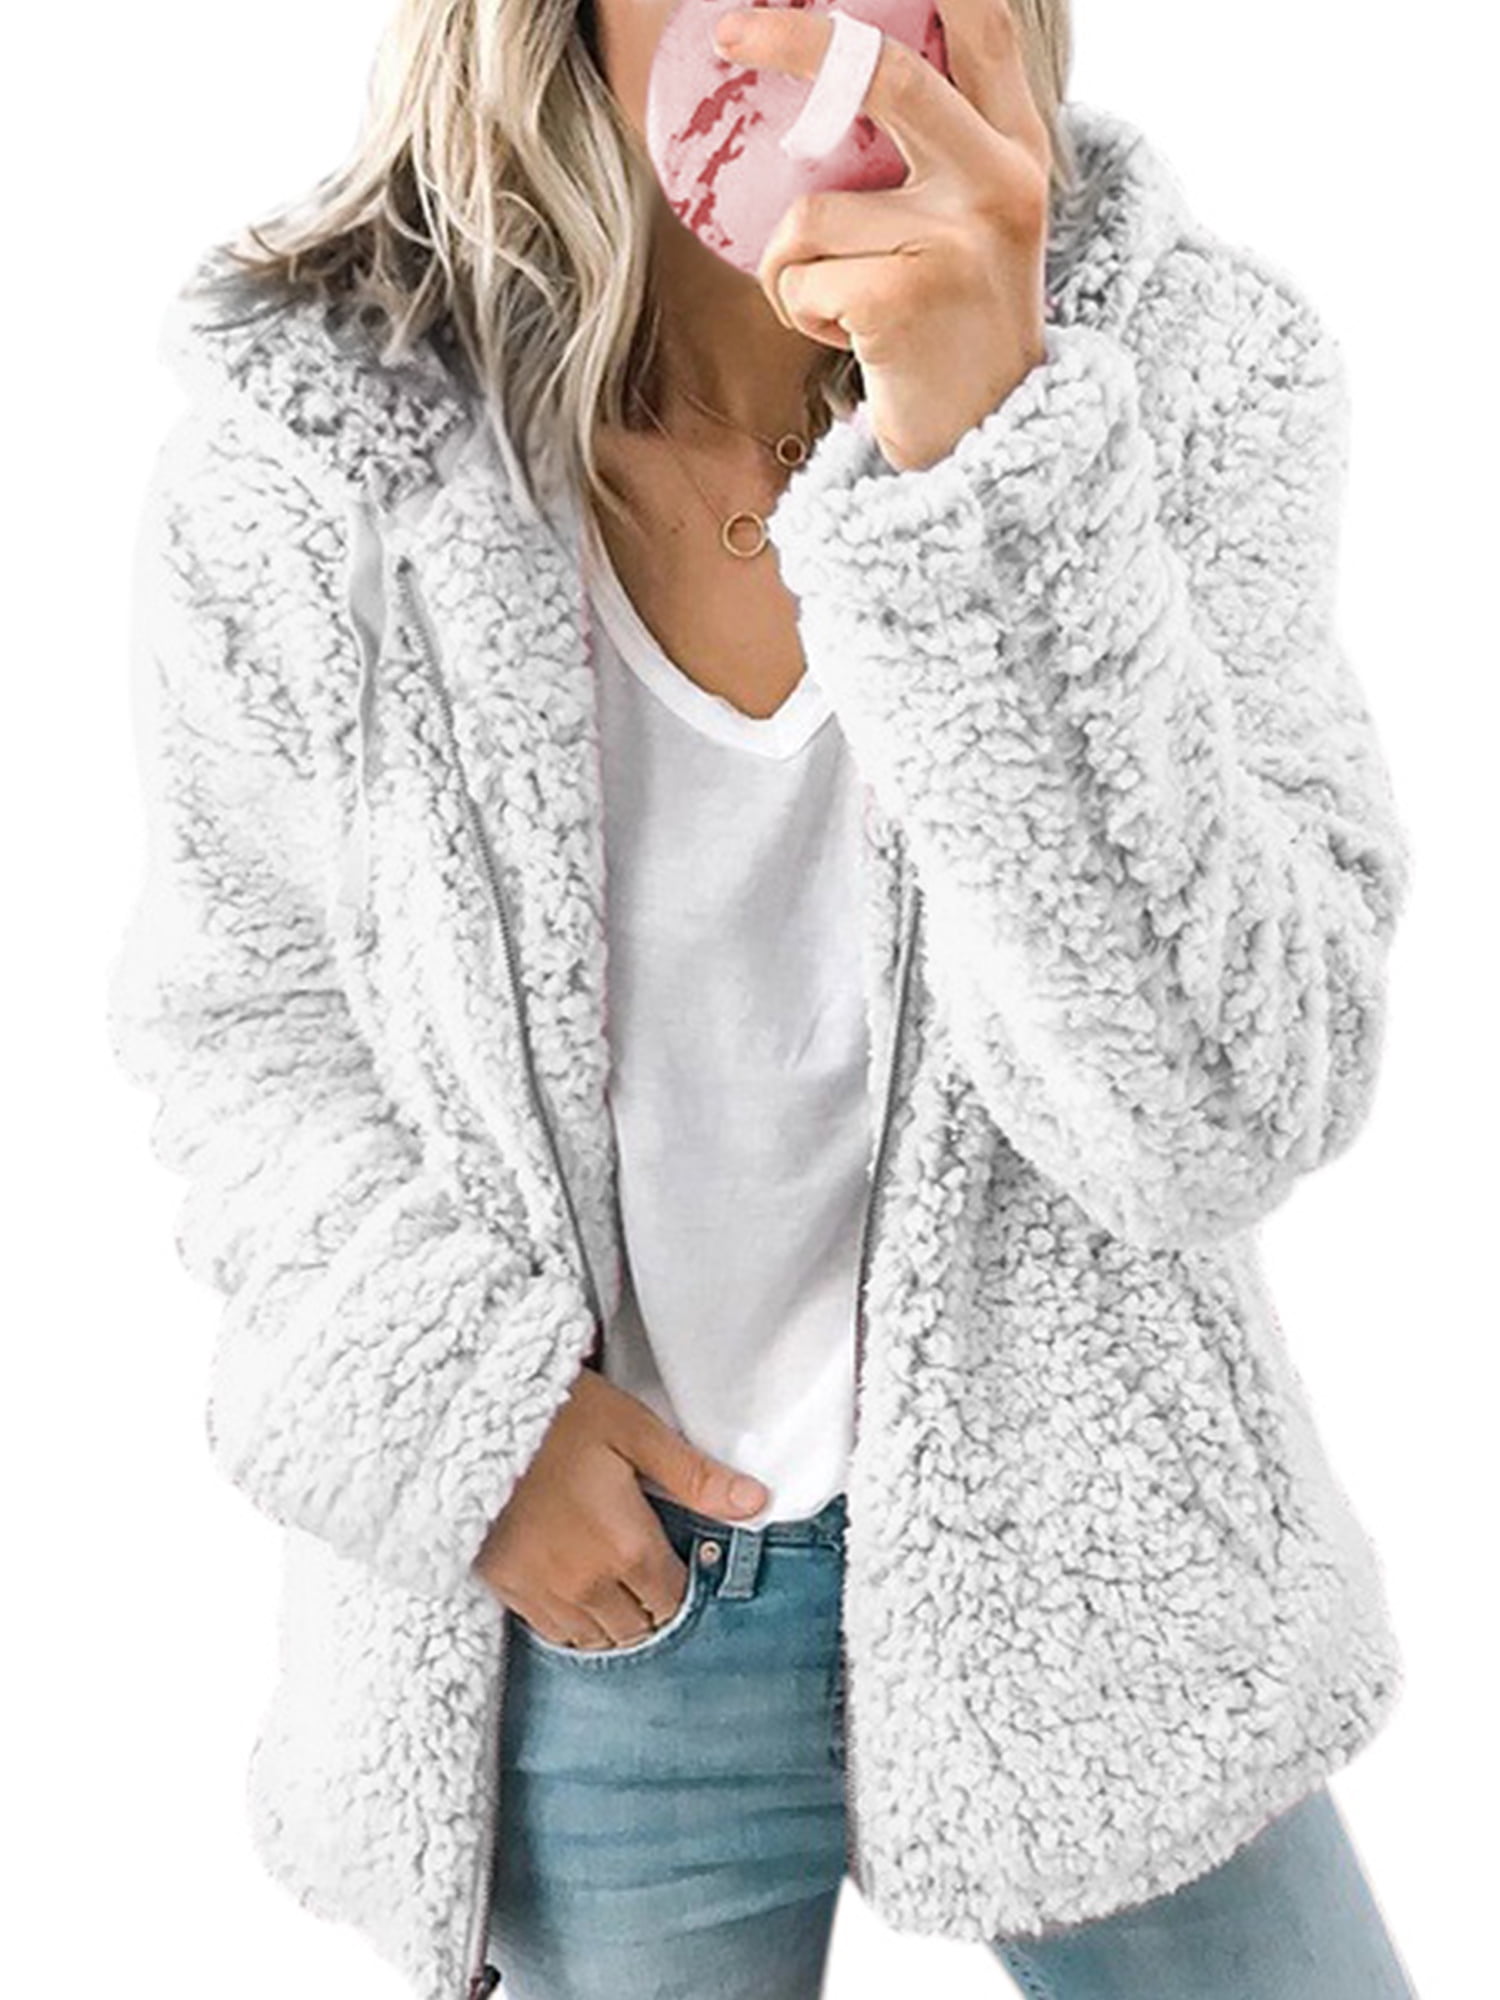 Molif Winter Long Sleeve Basic Outerwear Women Retro Hooded Ethnic Printed Faux Fluffy Warm Thicken Coat 